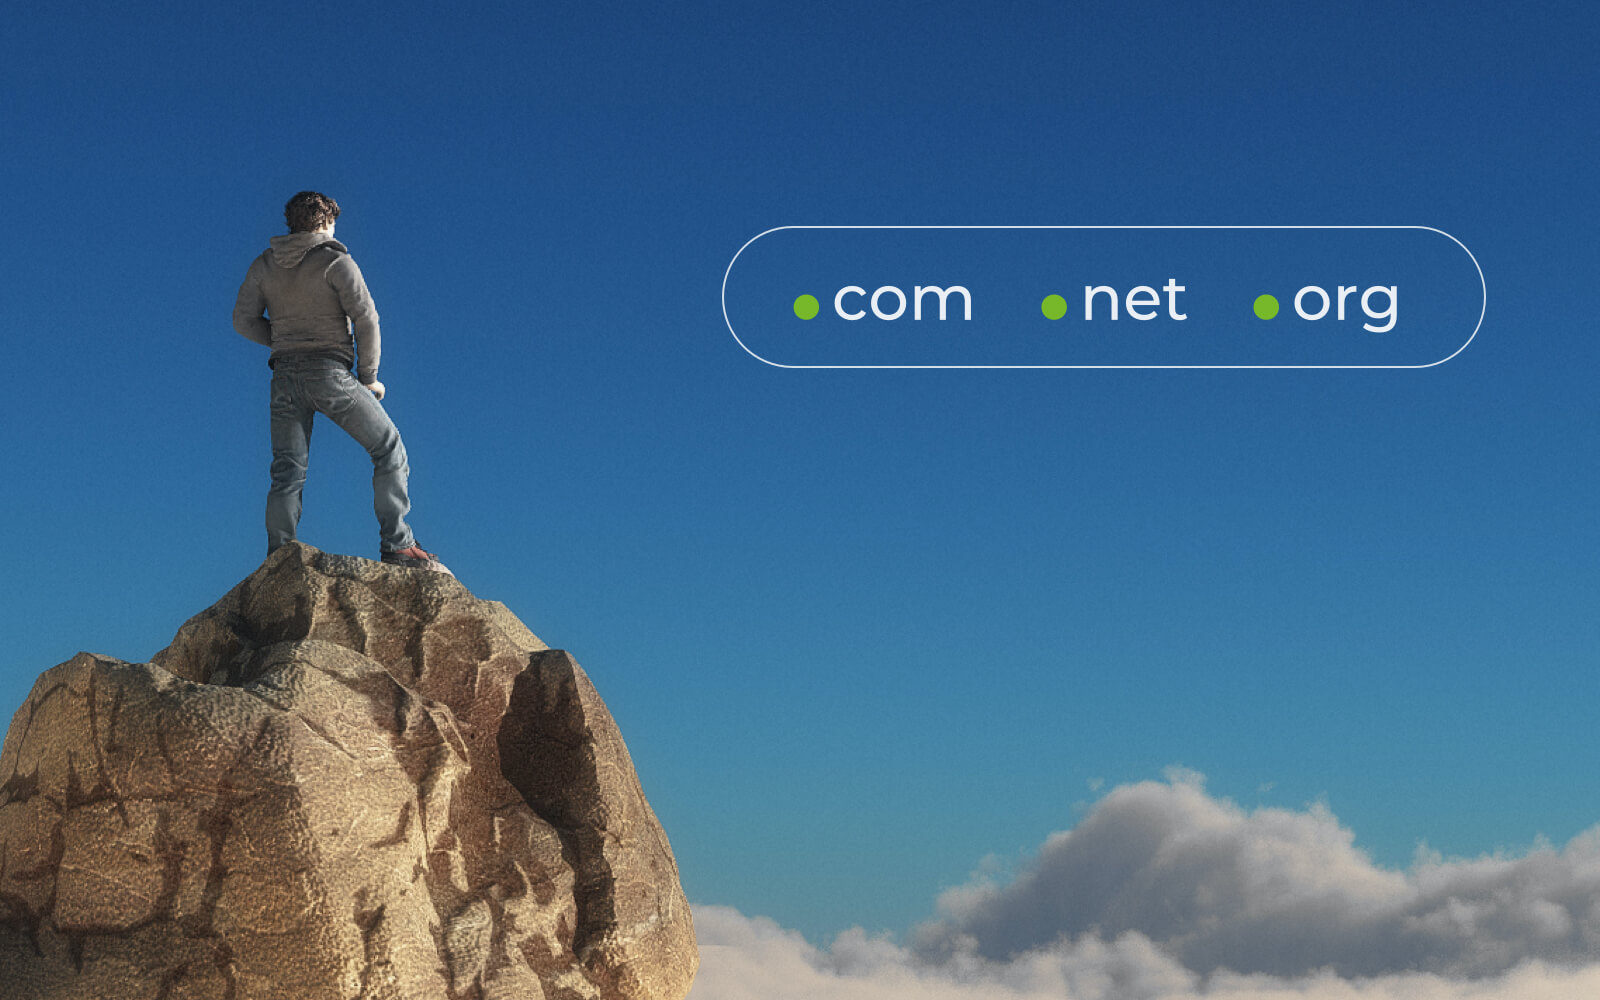 Examples of top level domains within a domain name